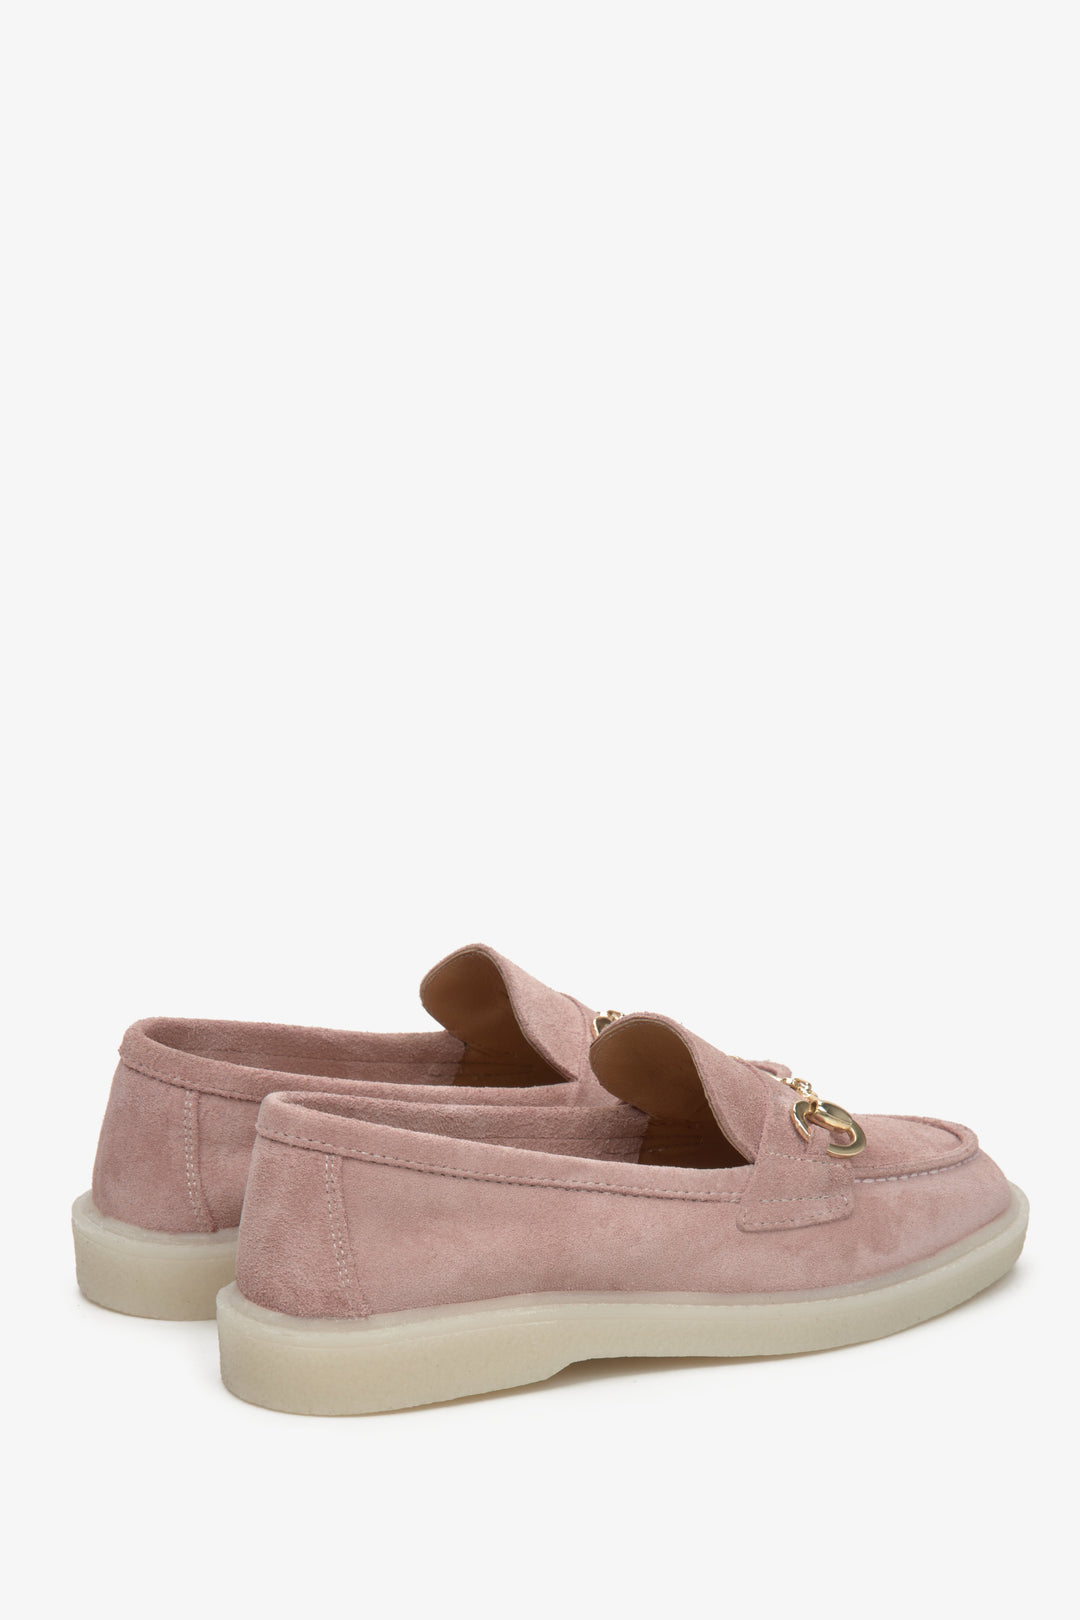 Women's light pink loafers made of velour and leather with gold buckle by Estro - close up on heel counter.